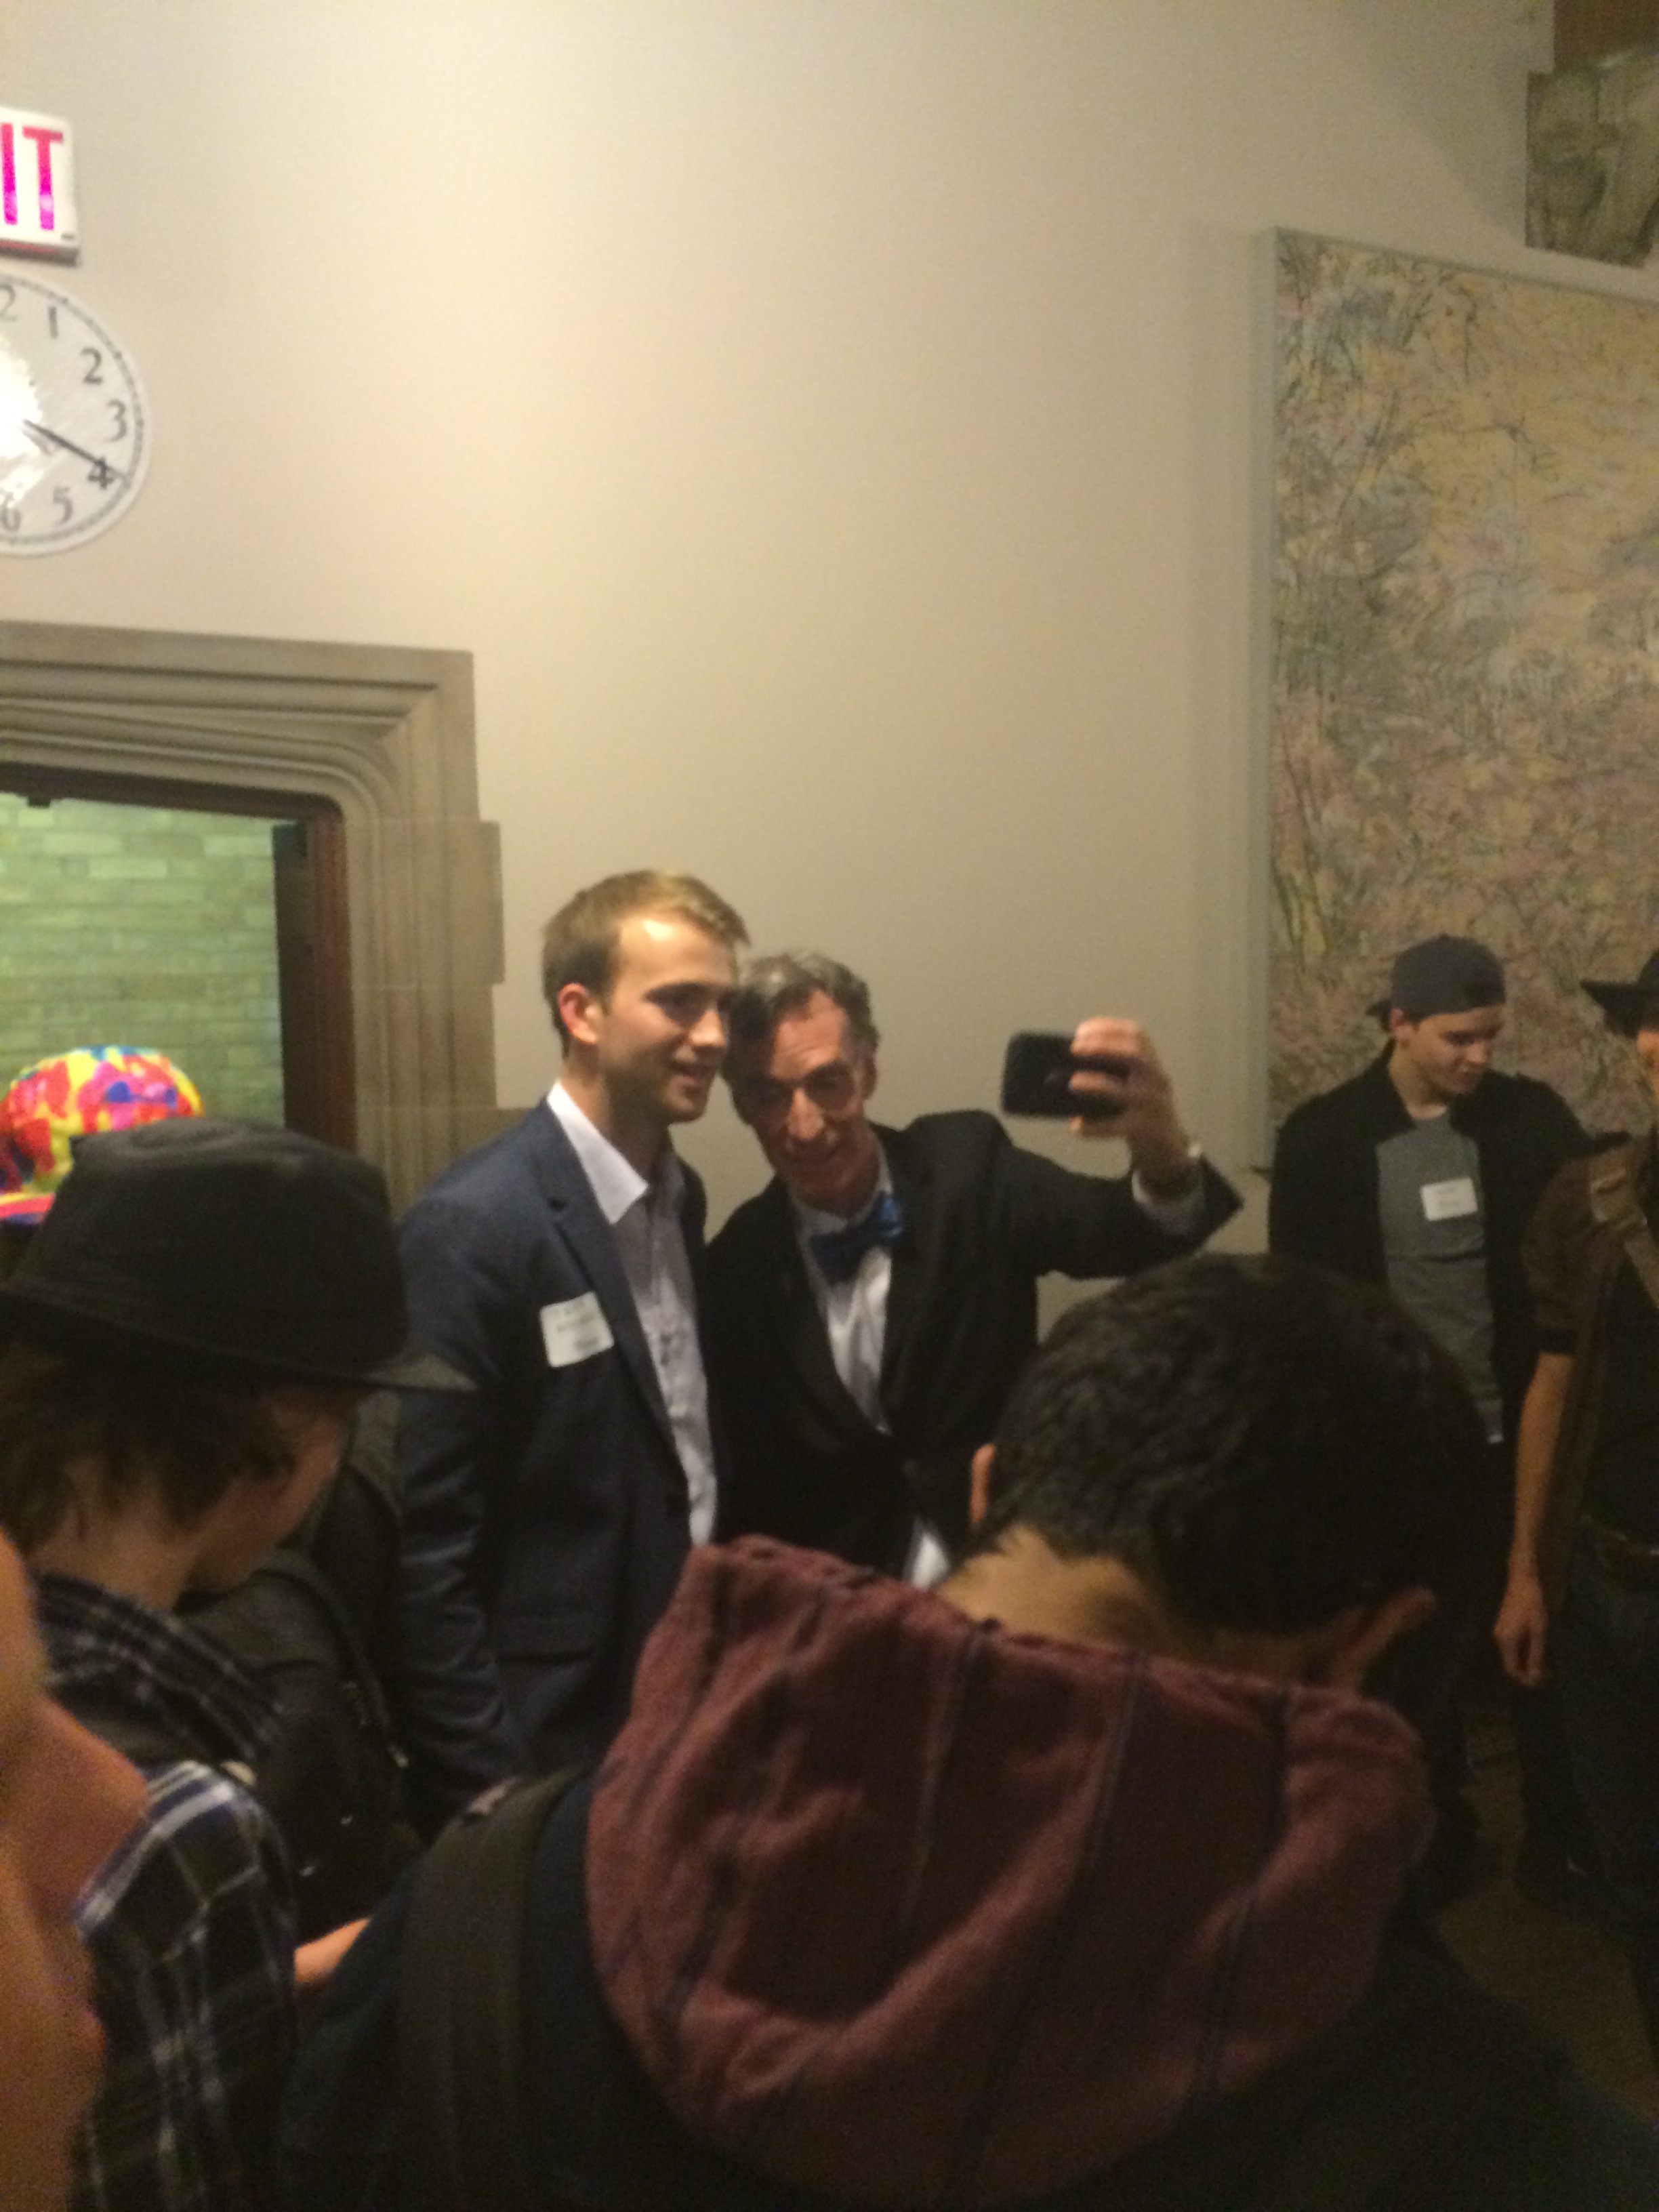 Bill Nye and guests at the Hart House reception